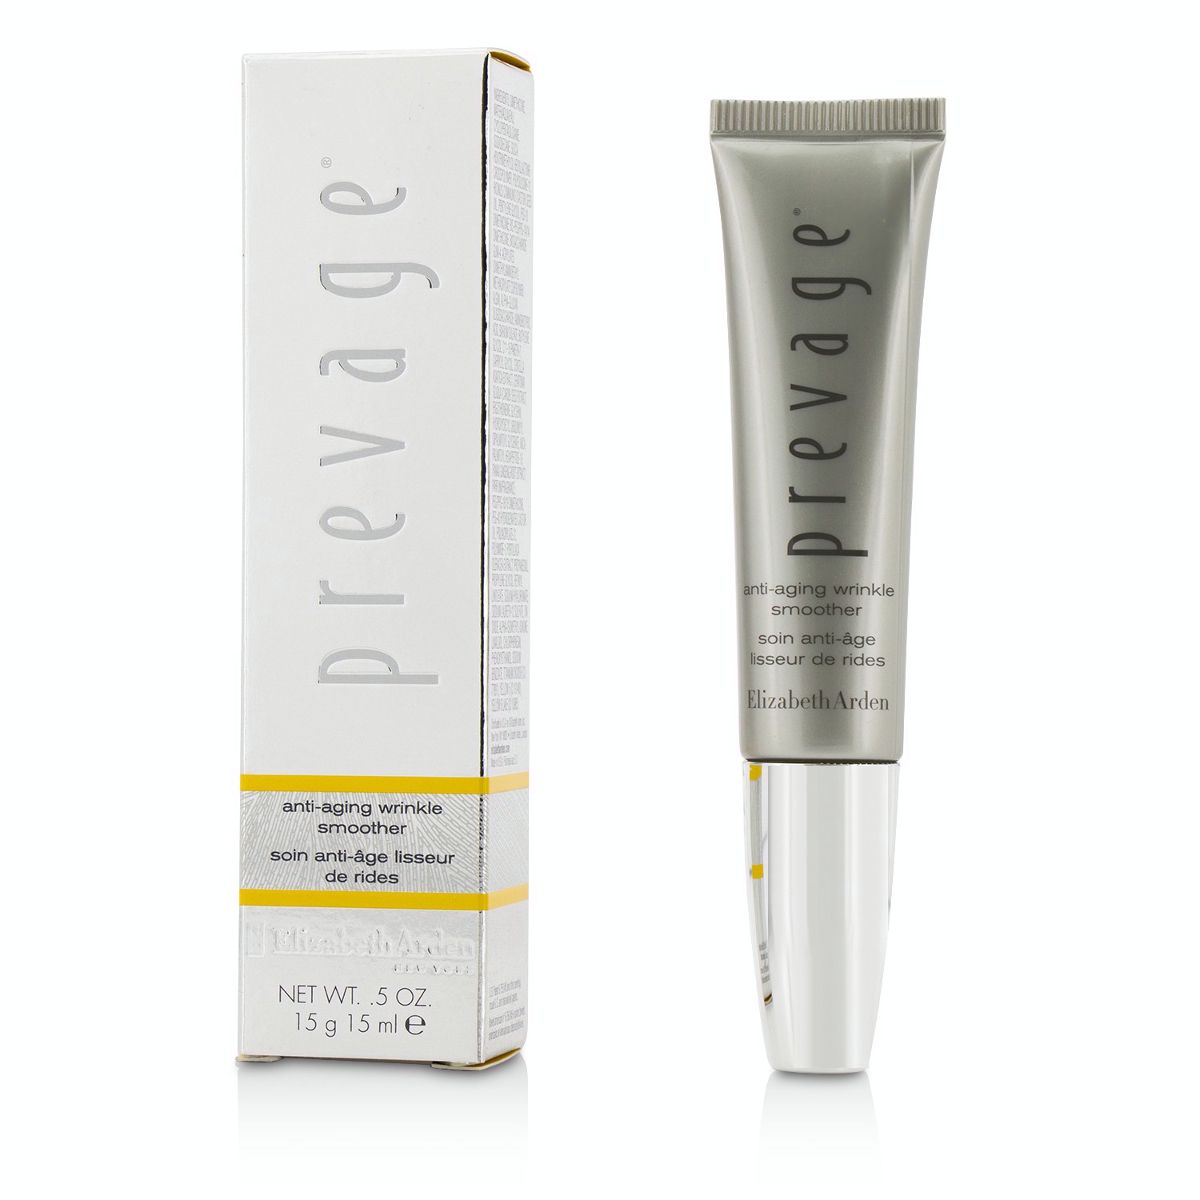 Anti-Aging Wrinkle Smoother Prevage Image